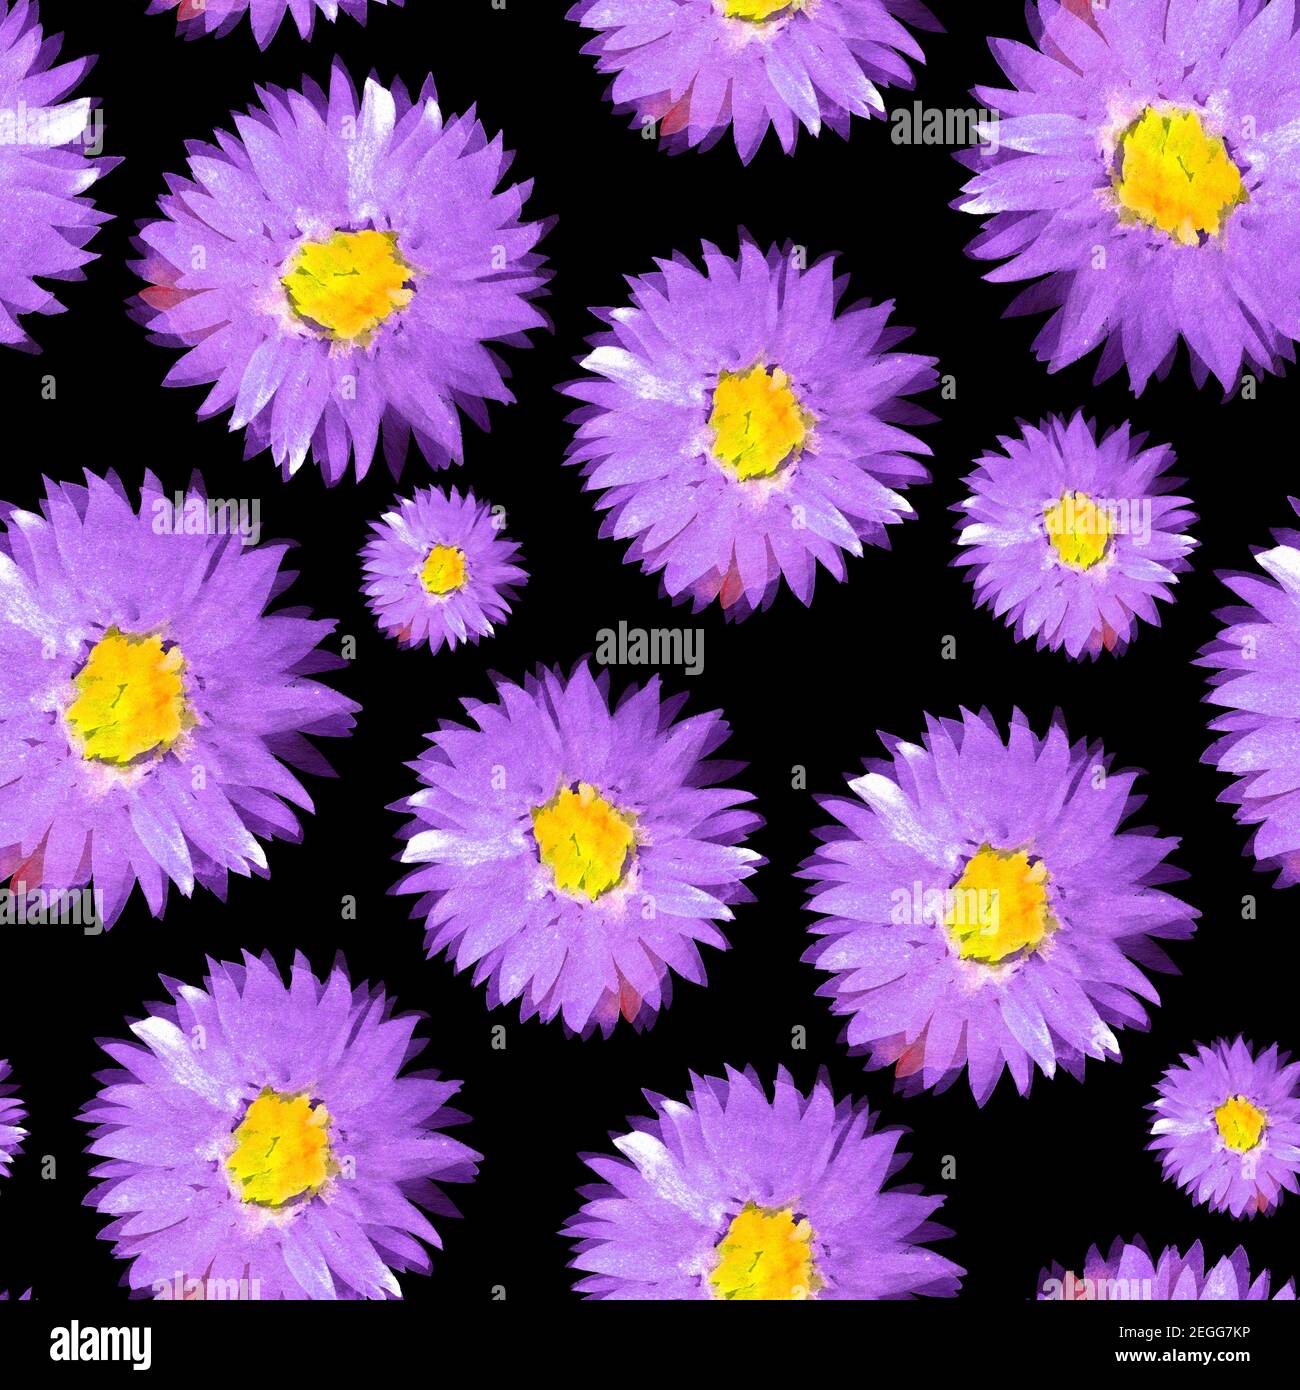 Violet sunny aster flowers seamless pattern Stock Photo